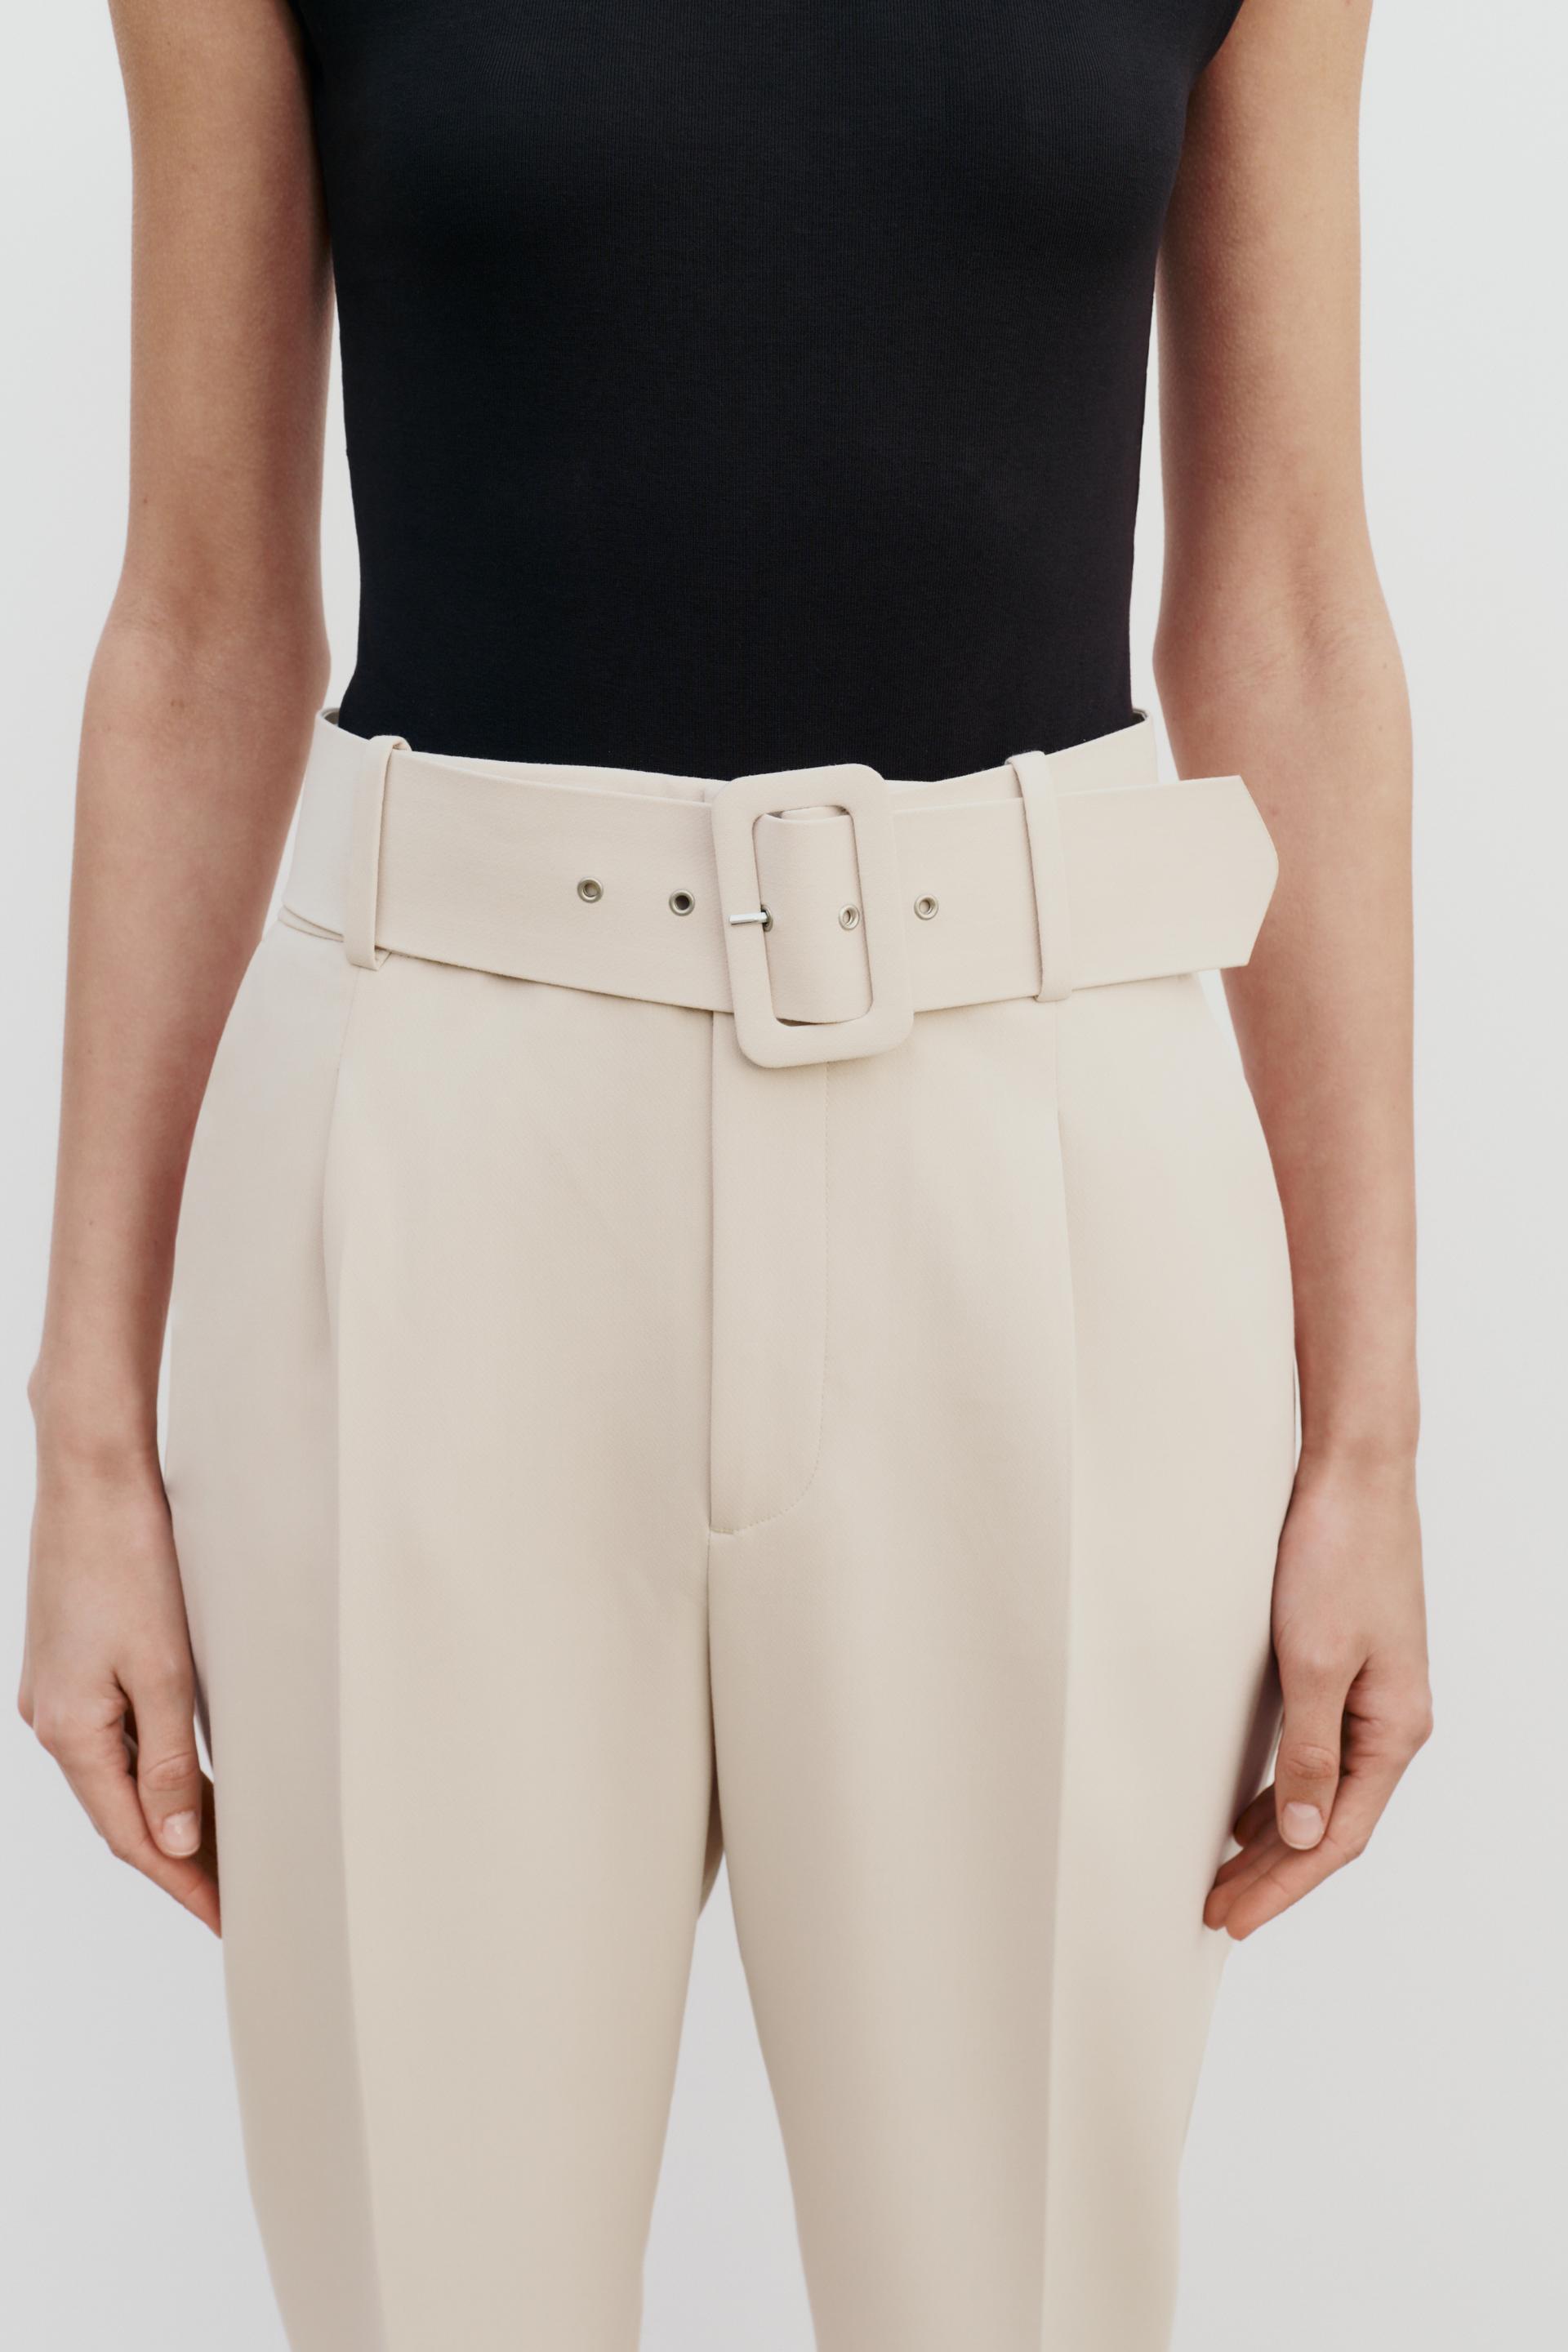 TROUSERS WITH BUCKLED BELT  Zara trousers, High waist outfits